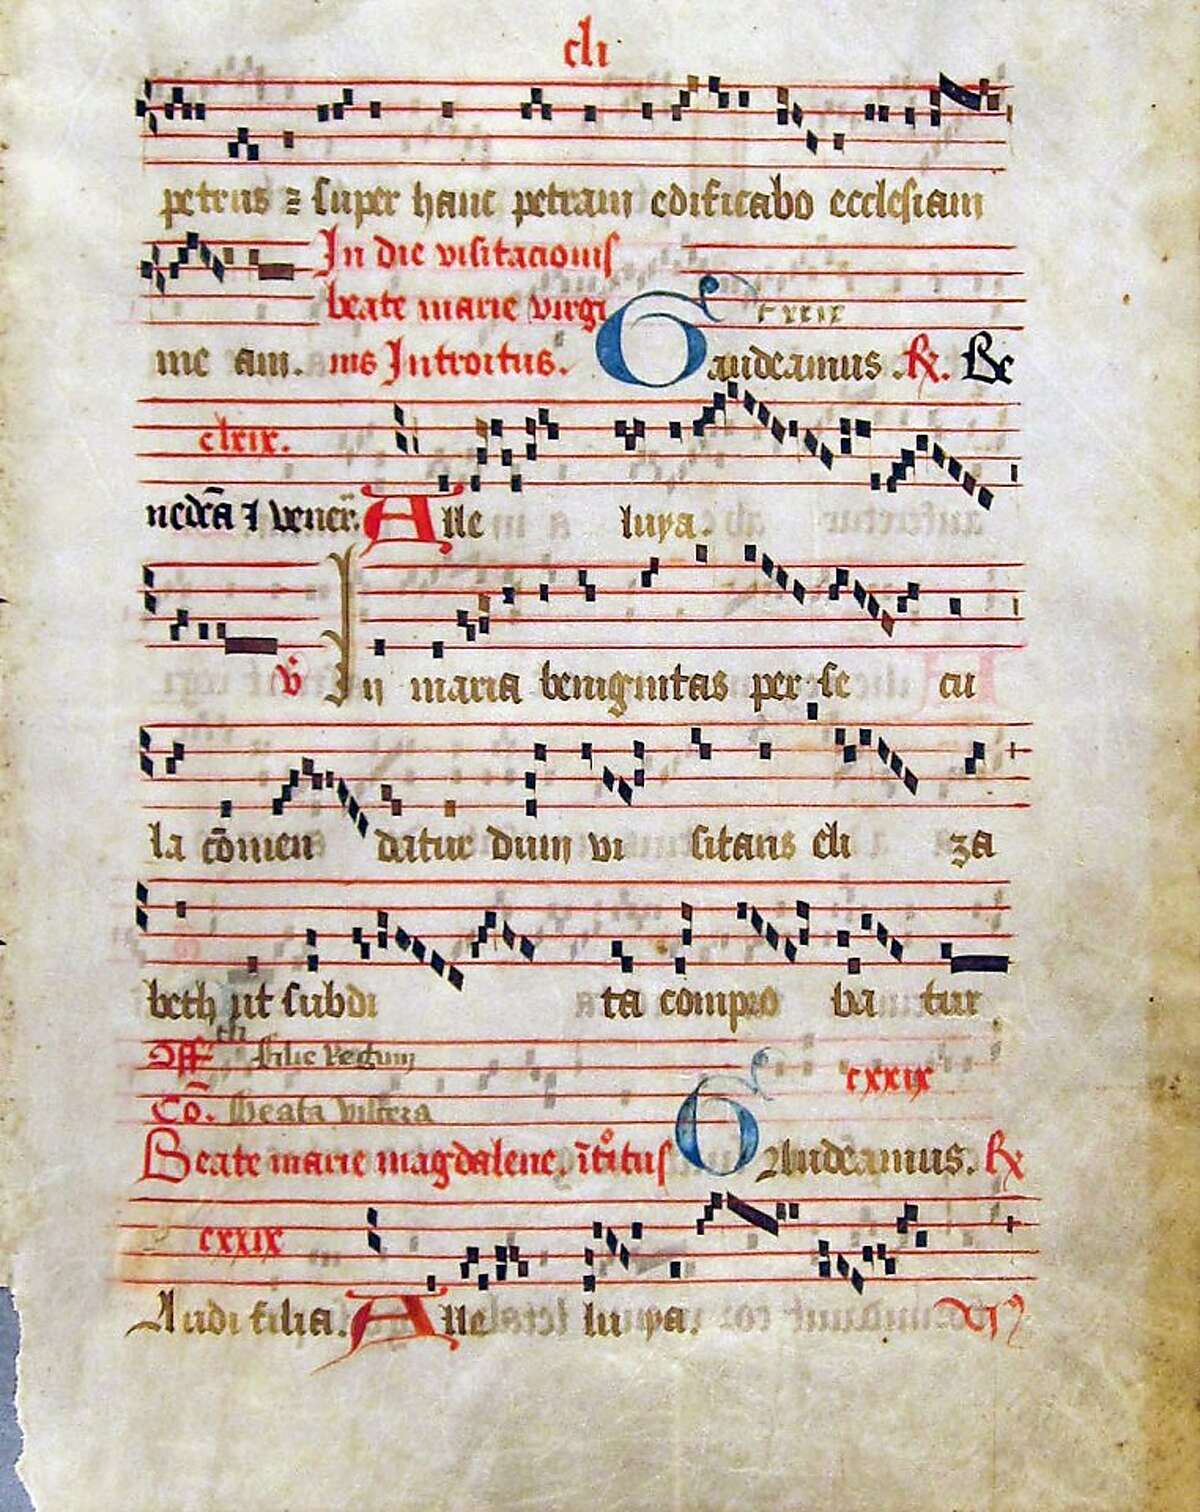 A hand-illuminated parchment page of Gregorian chant from a 15th French choir book will be on view in "The Illuminated Library" at San Francisco State University's Fine Arts Gallery. Courtesy the Frank V. de Bellis Collection at the SFSU's J. Paul Leonard Library.